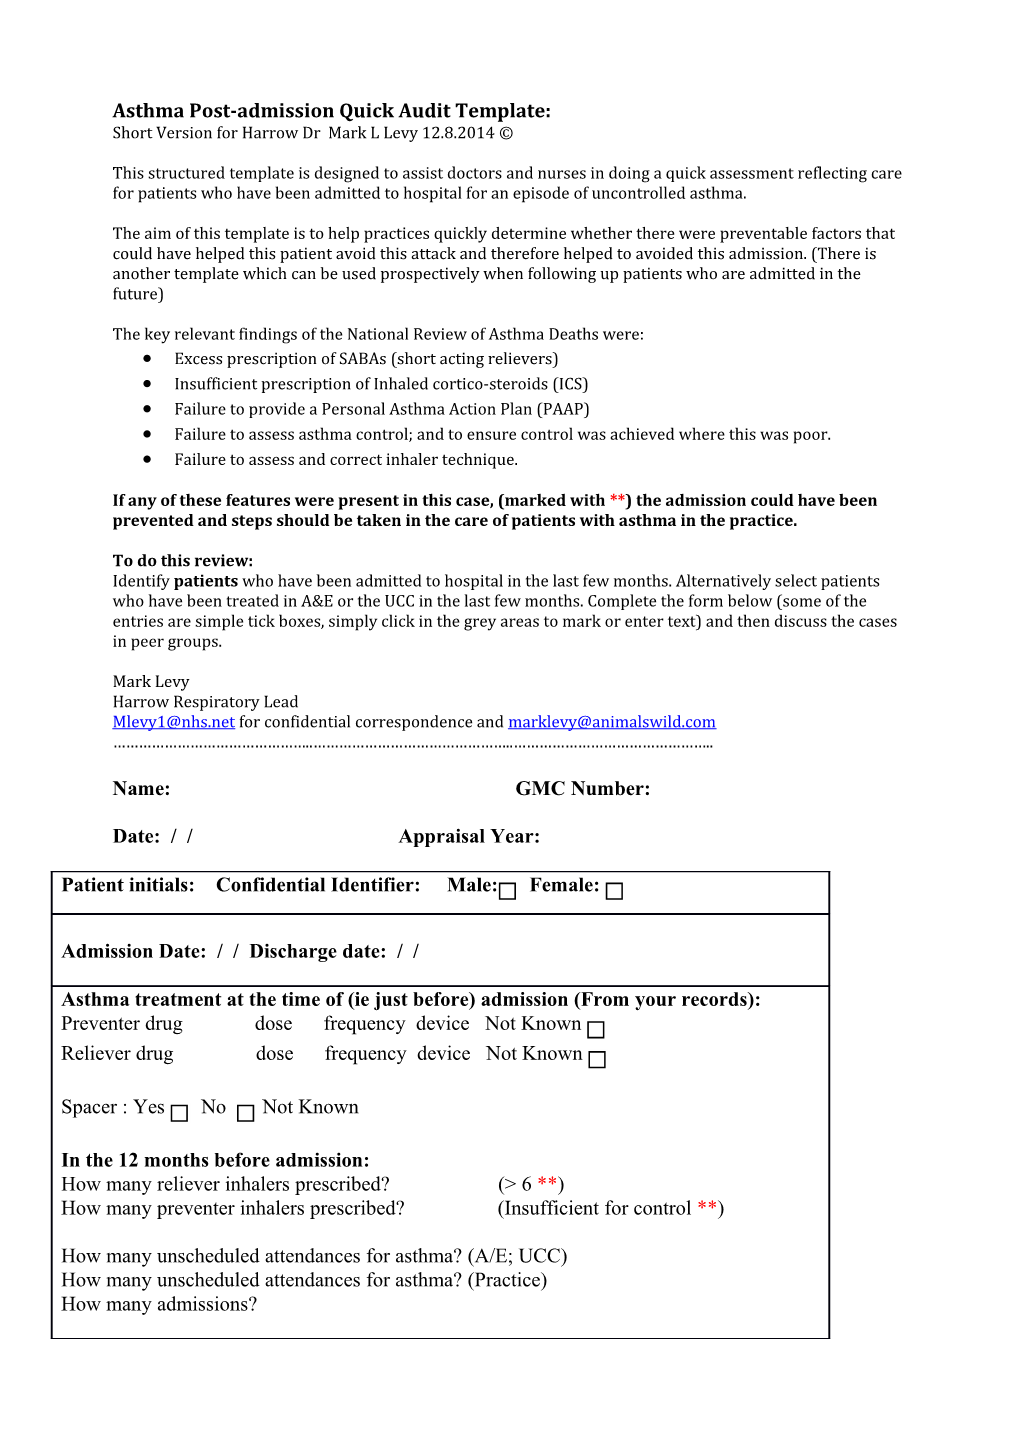 Asthma Post-Admission Quick Audit Template